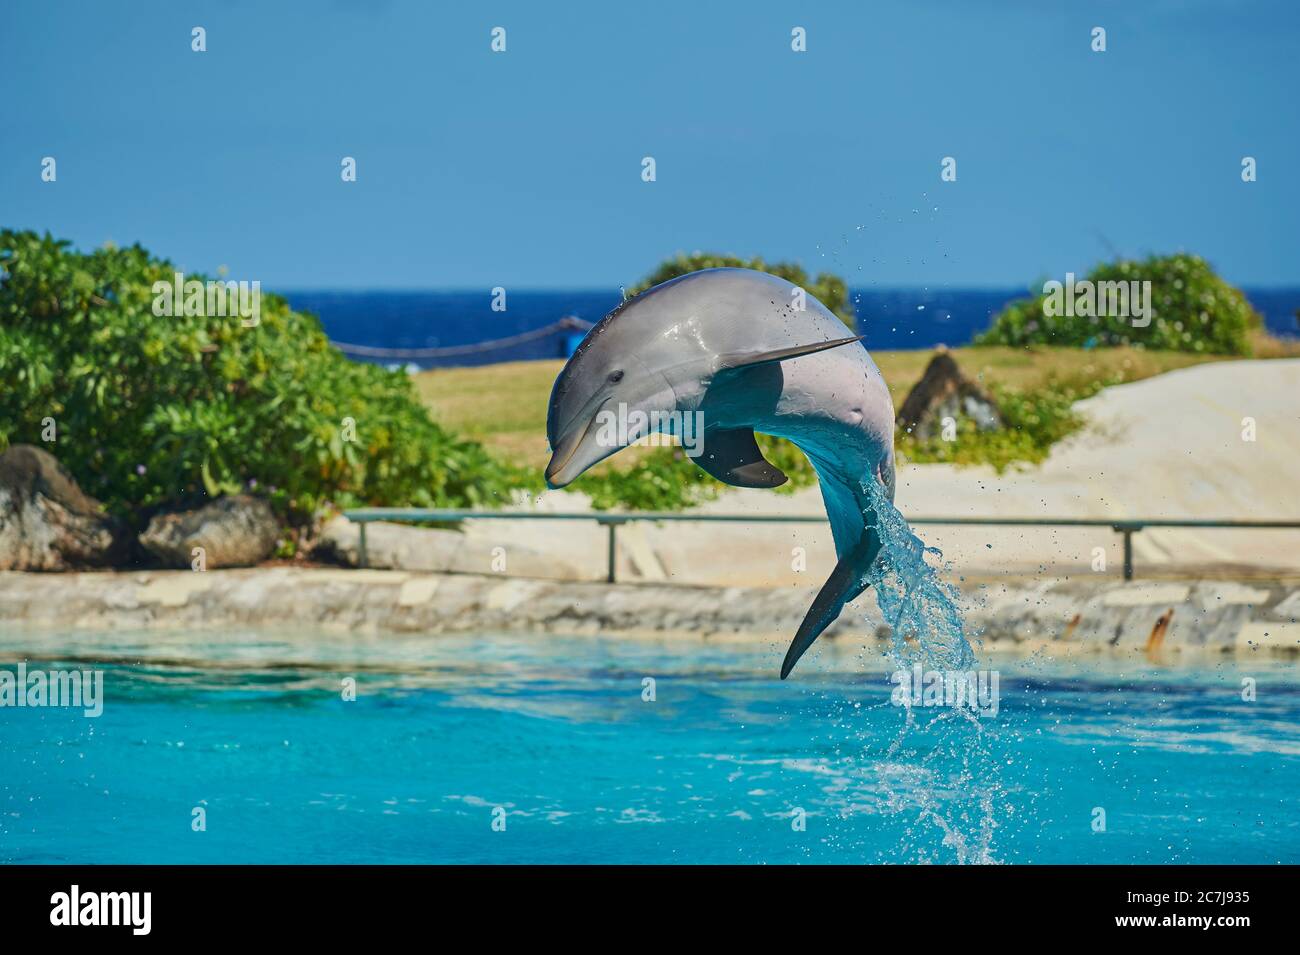 Bottlenosed dolphin, Common bottle-nosed dolphin (Tursiops truncatus), jump in a dolphinarium Stock Photo